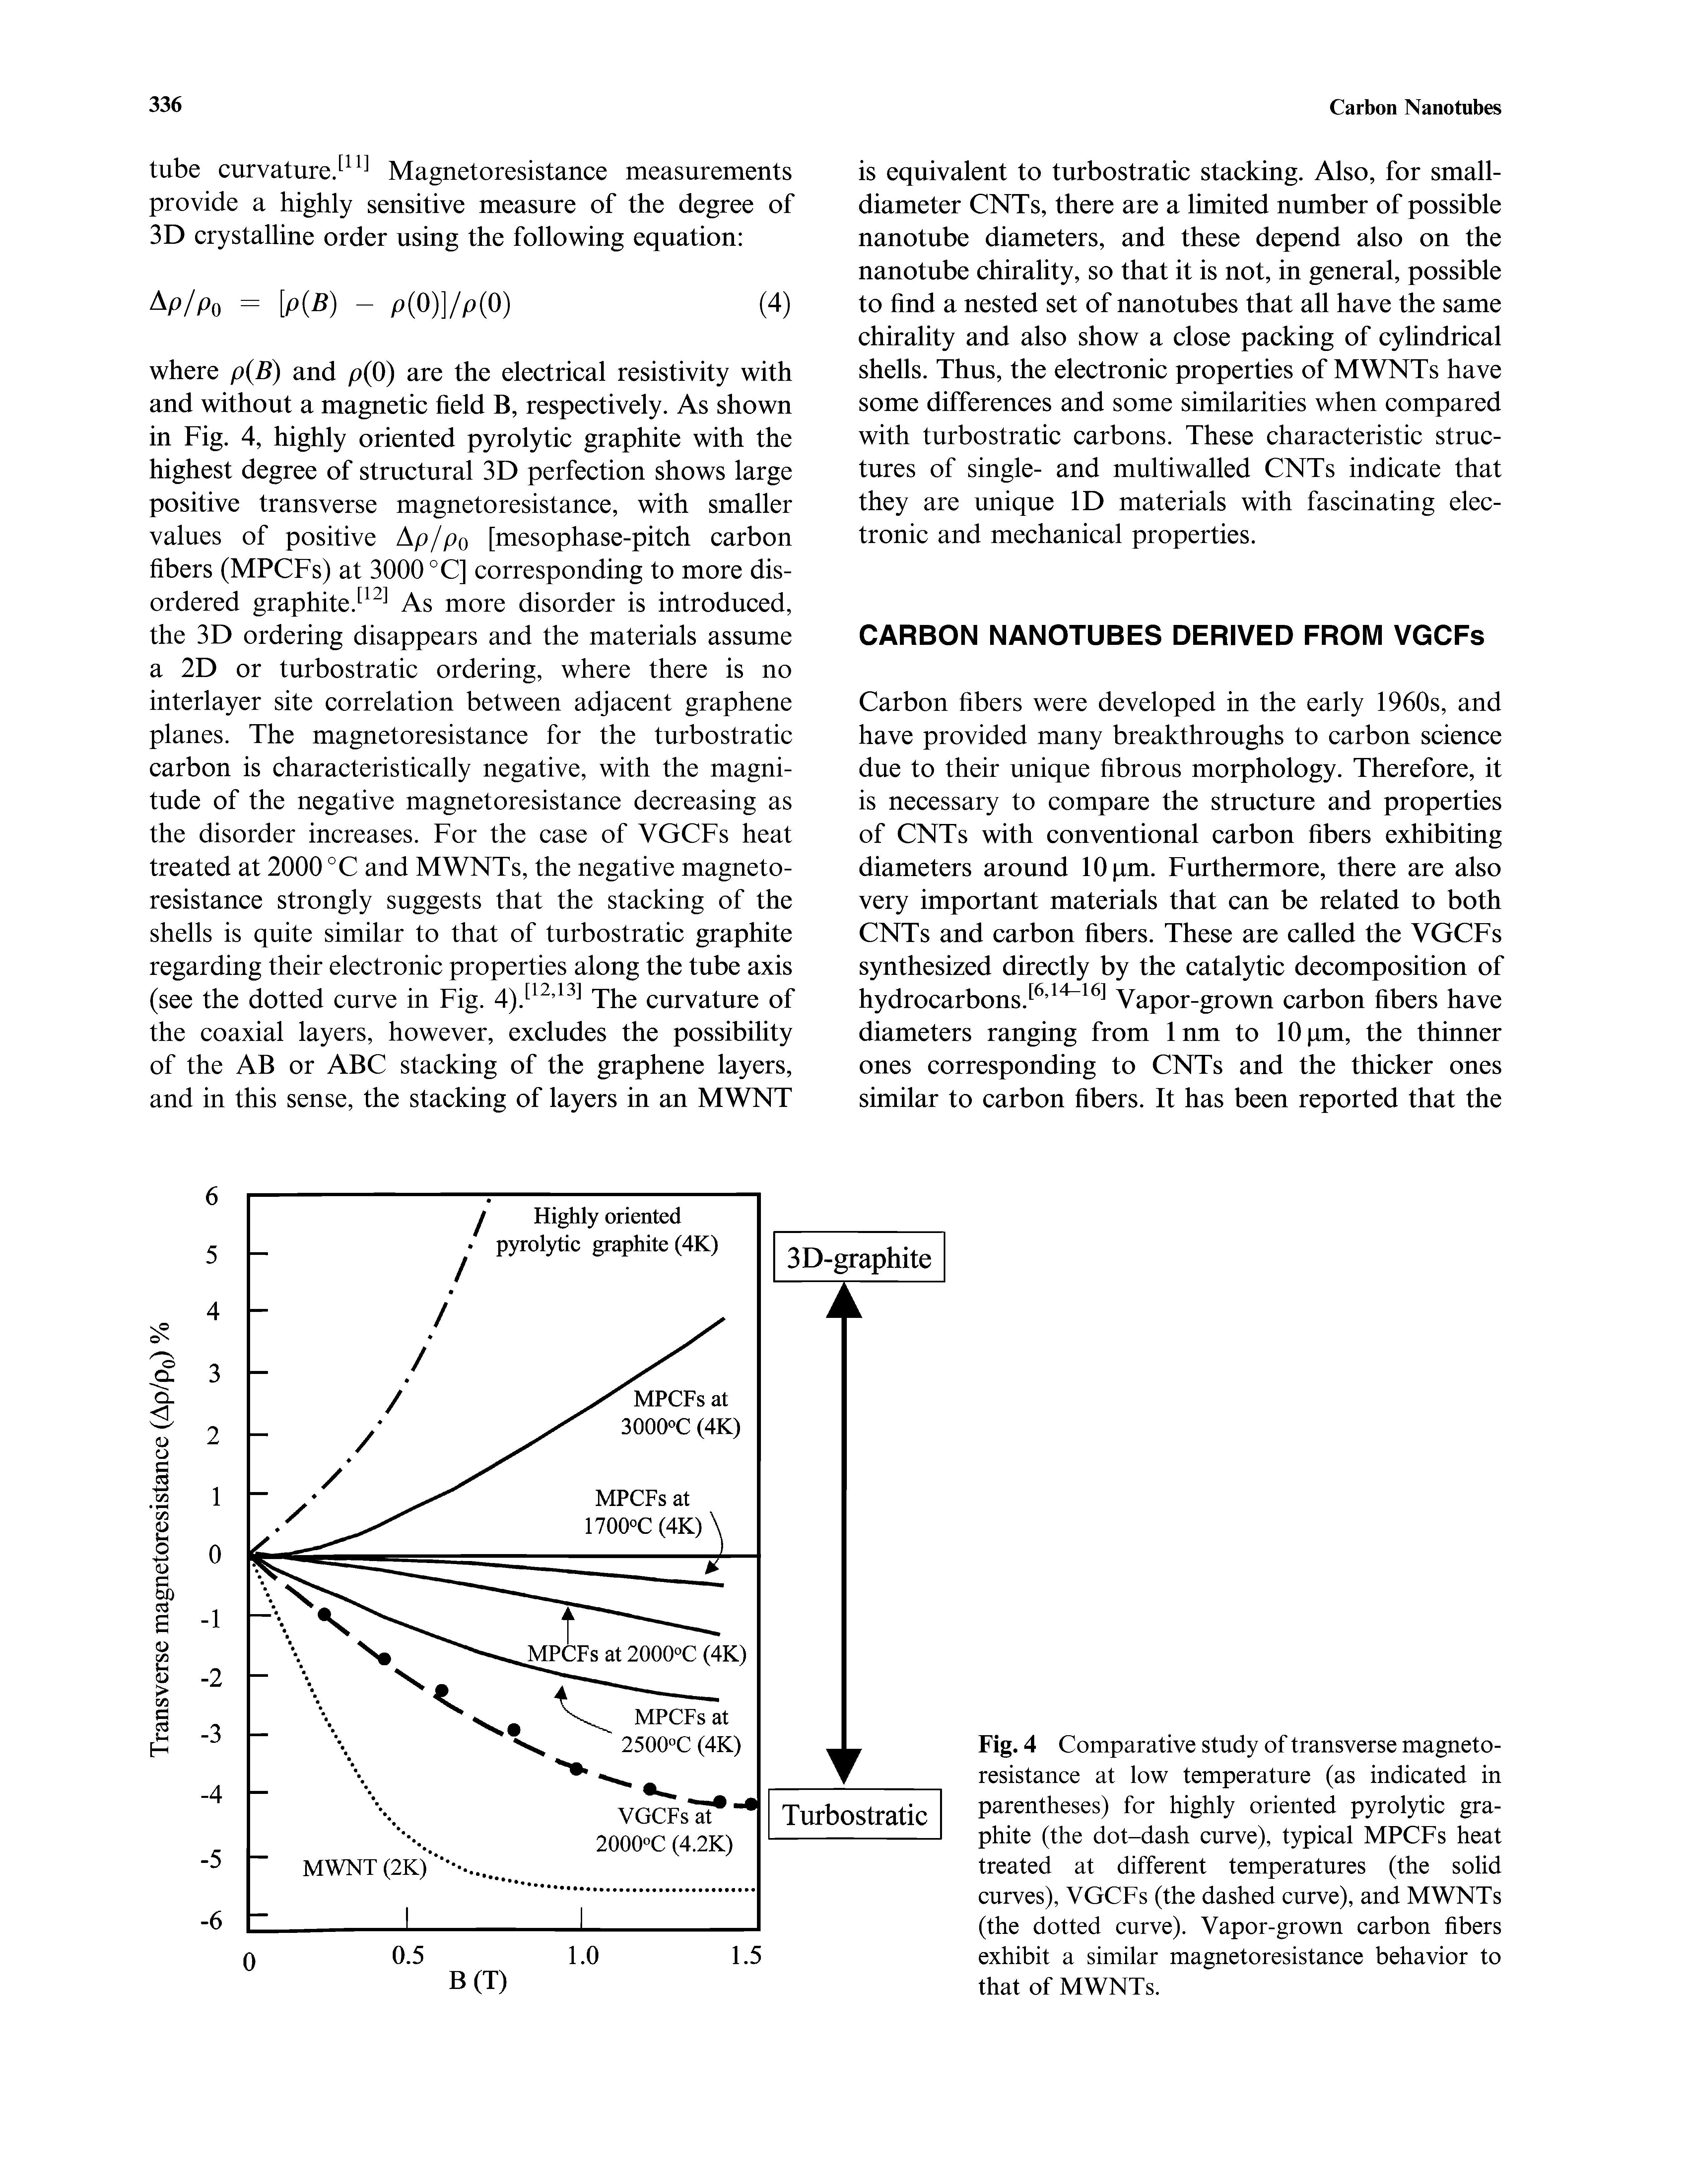 Fig. 4 Comparative study of transverse magnetoresistance at low temperature (as indicated in parentheses) for highly oriented pyrolytic graphite (the dot-dash curve), typical MPCFs heat treated at different temperatures (the solid curves), VGCFs (the dashed curve), and MWNTs (the dotted curve). Vapor-grown carbon fibers exhibit a similar magnetoresistance behavior to that of MWNTs.